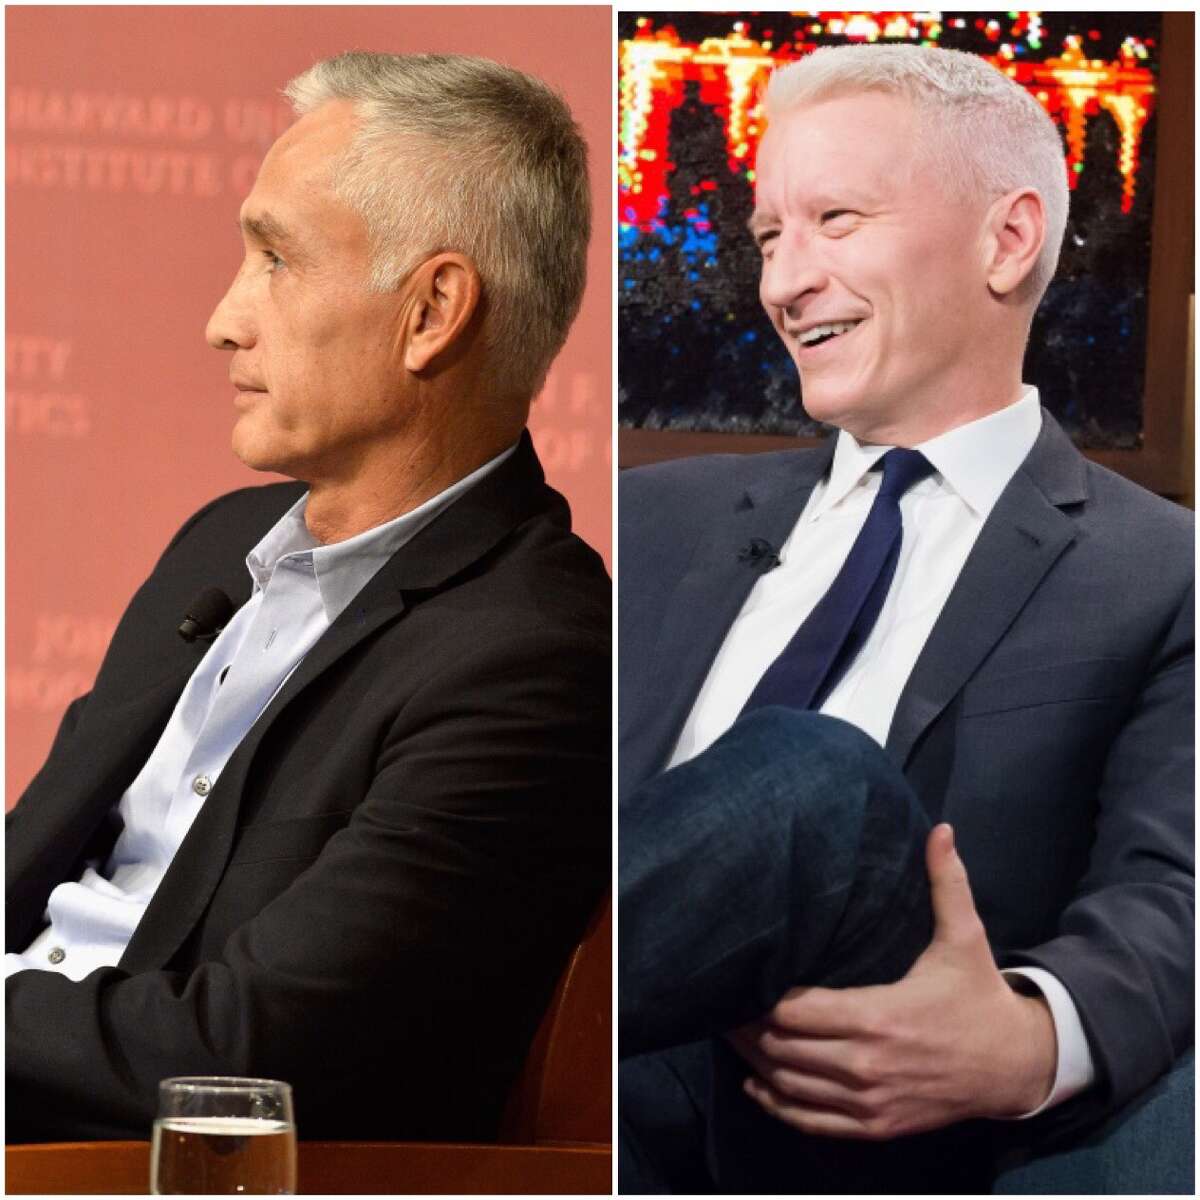 Jorge Ramos and Anderson Cooper Ramos is known as the "Silver Fox" of Univision, but in terms of TV viewership, he might have a larger audience than his TV "twin." Image credit: Getty images